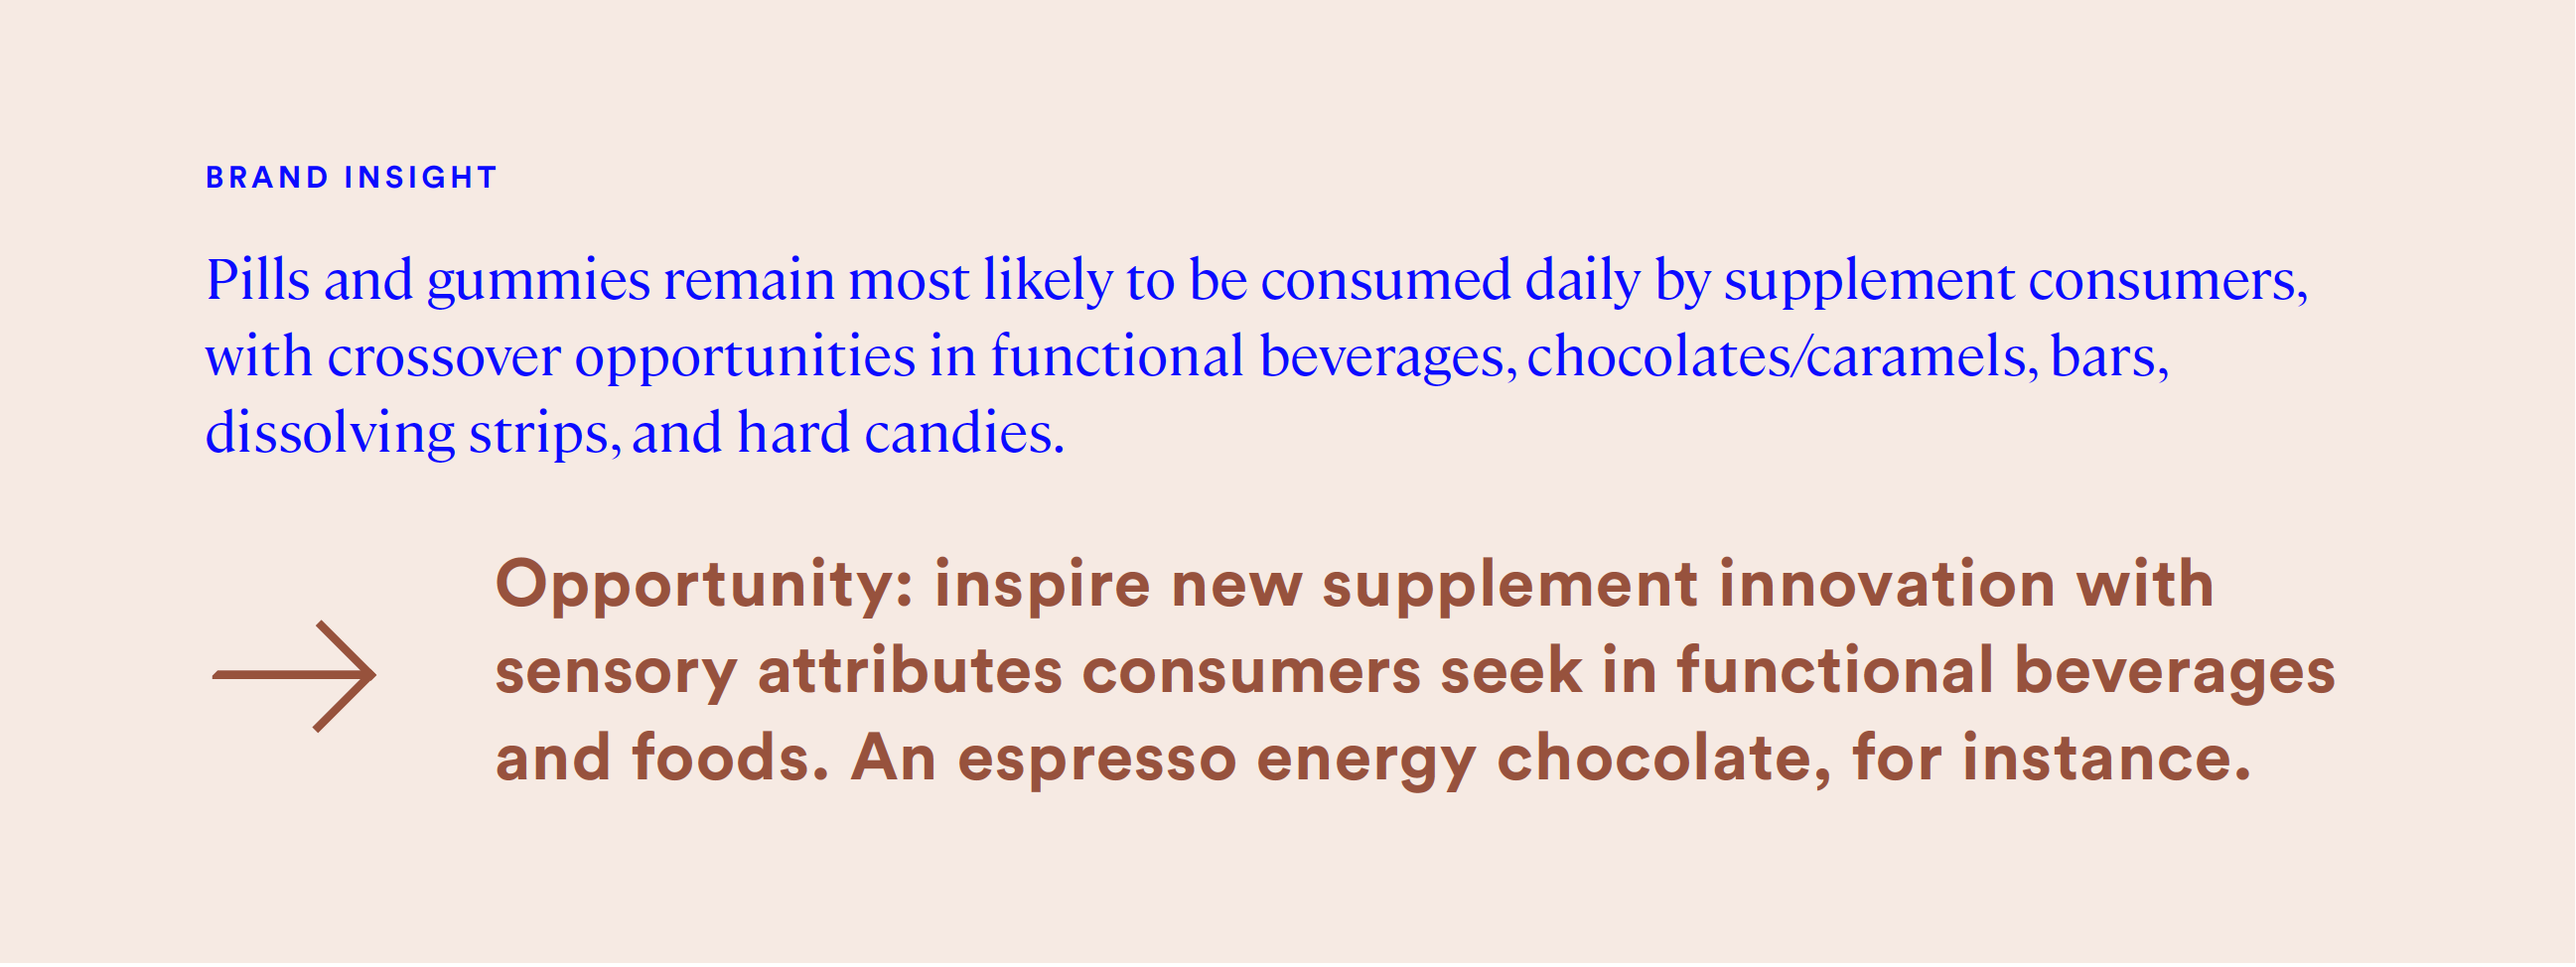 pills and gummies remain most likely to be consumed daily by supplement consumers, with crossover opportunities in functional beverages, chocolates/caramels, bars, dissolving strips, and hard candies.